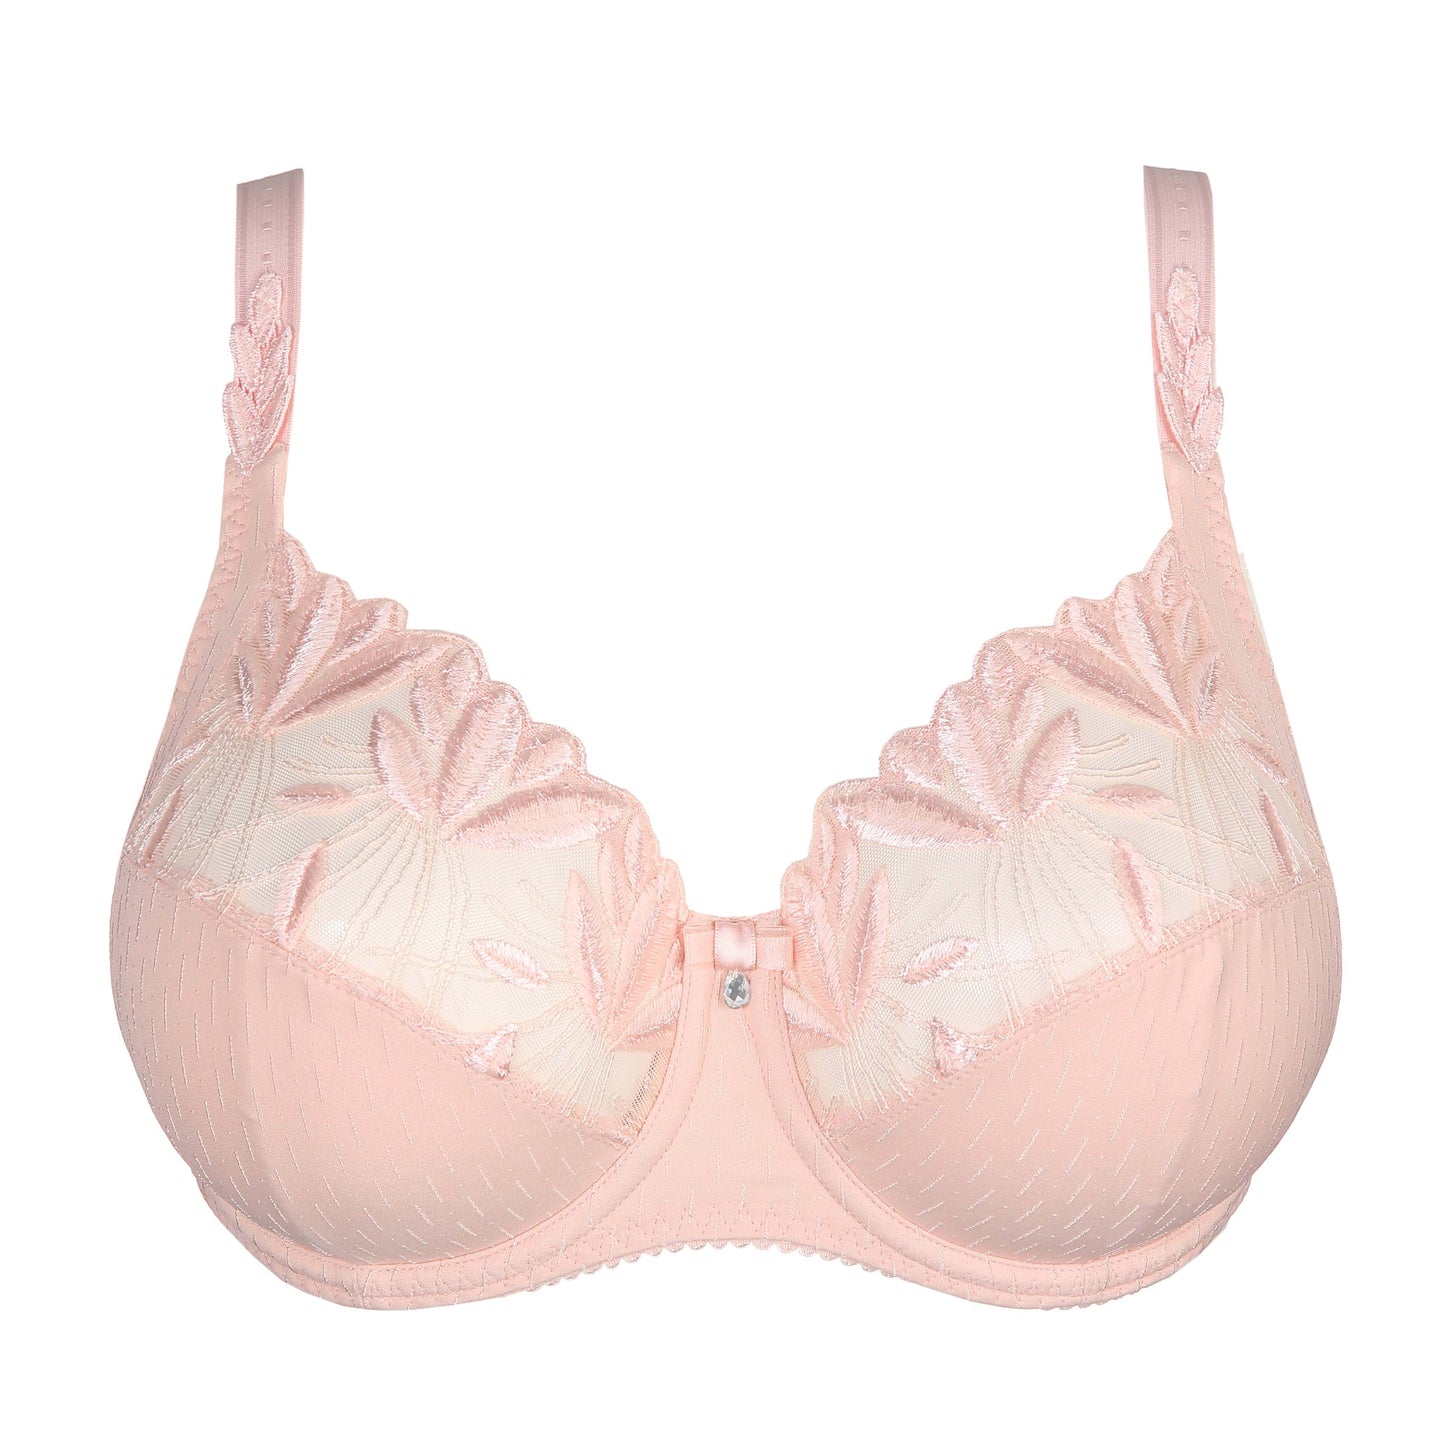 PrimaDonna Orlando volle cup bh pearly pink